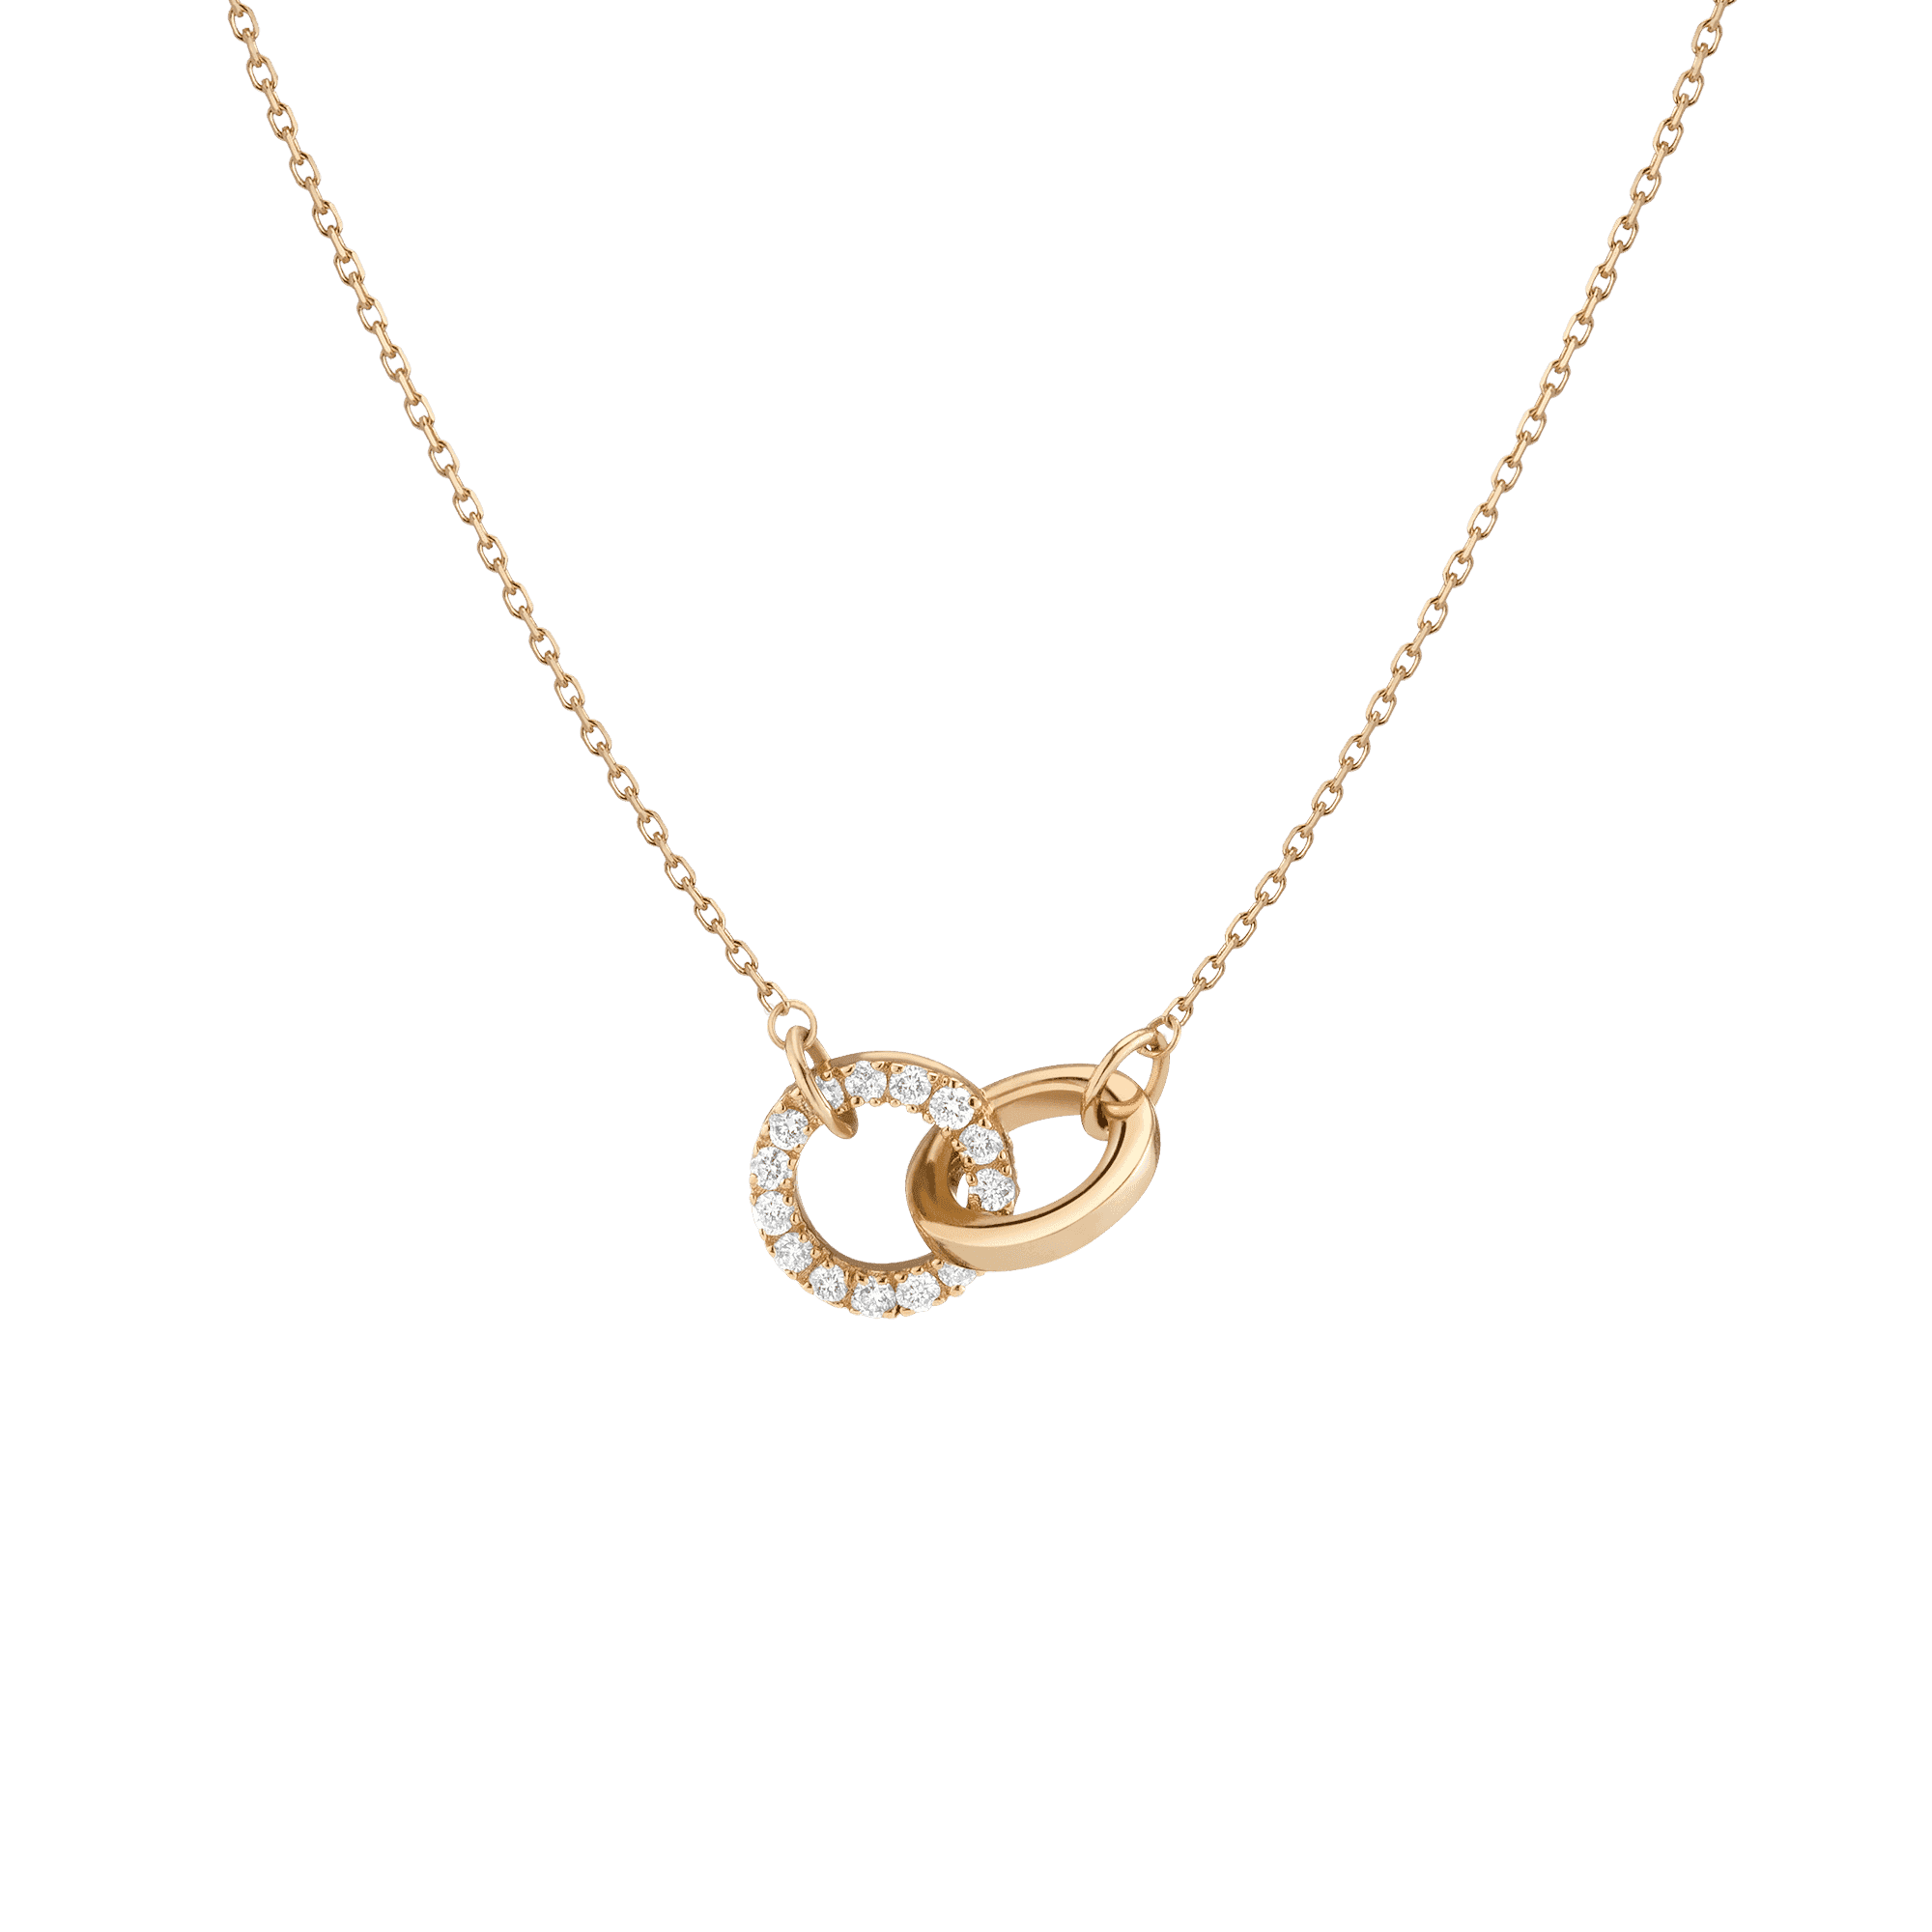 Aurate New York Diamond Connection Necklace, 14K Rose Gold